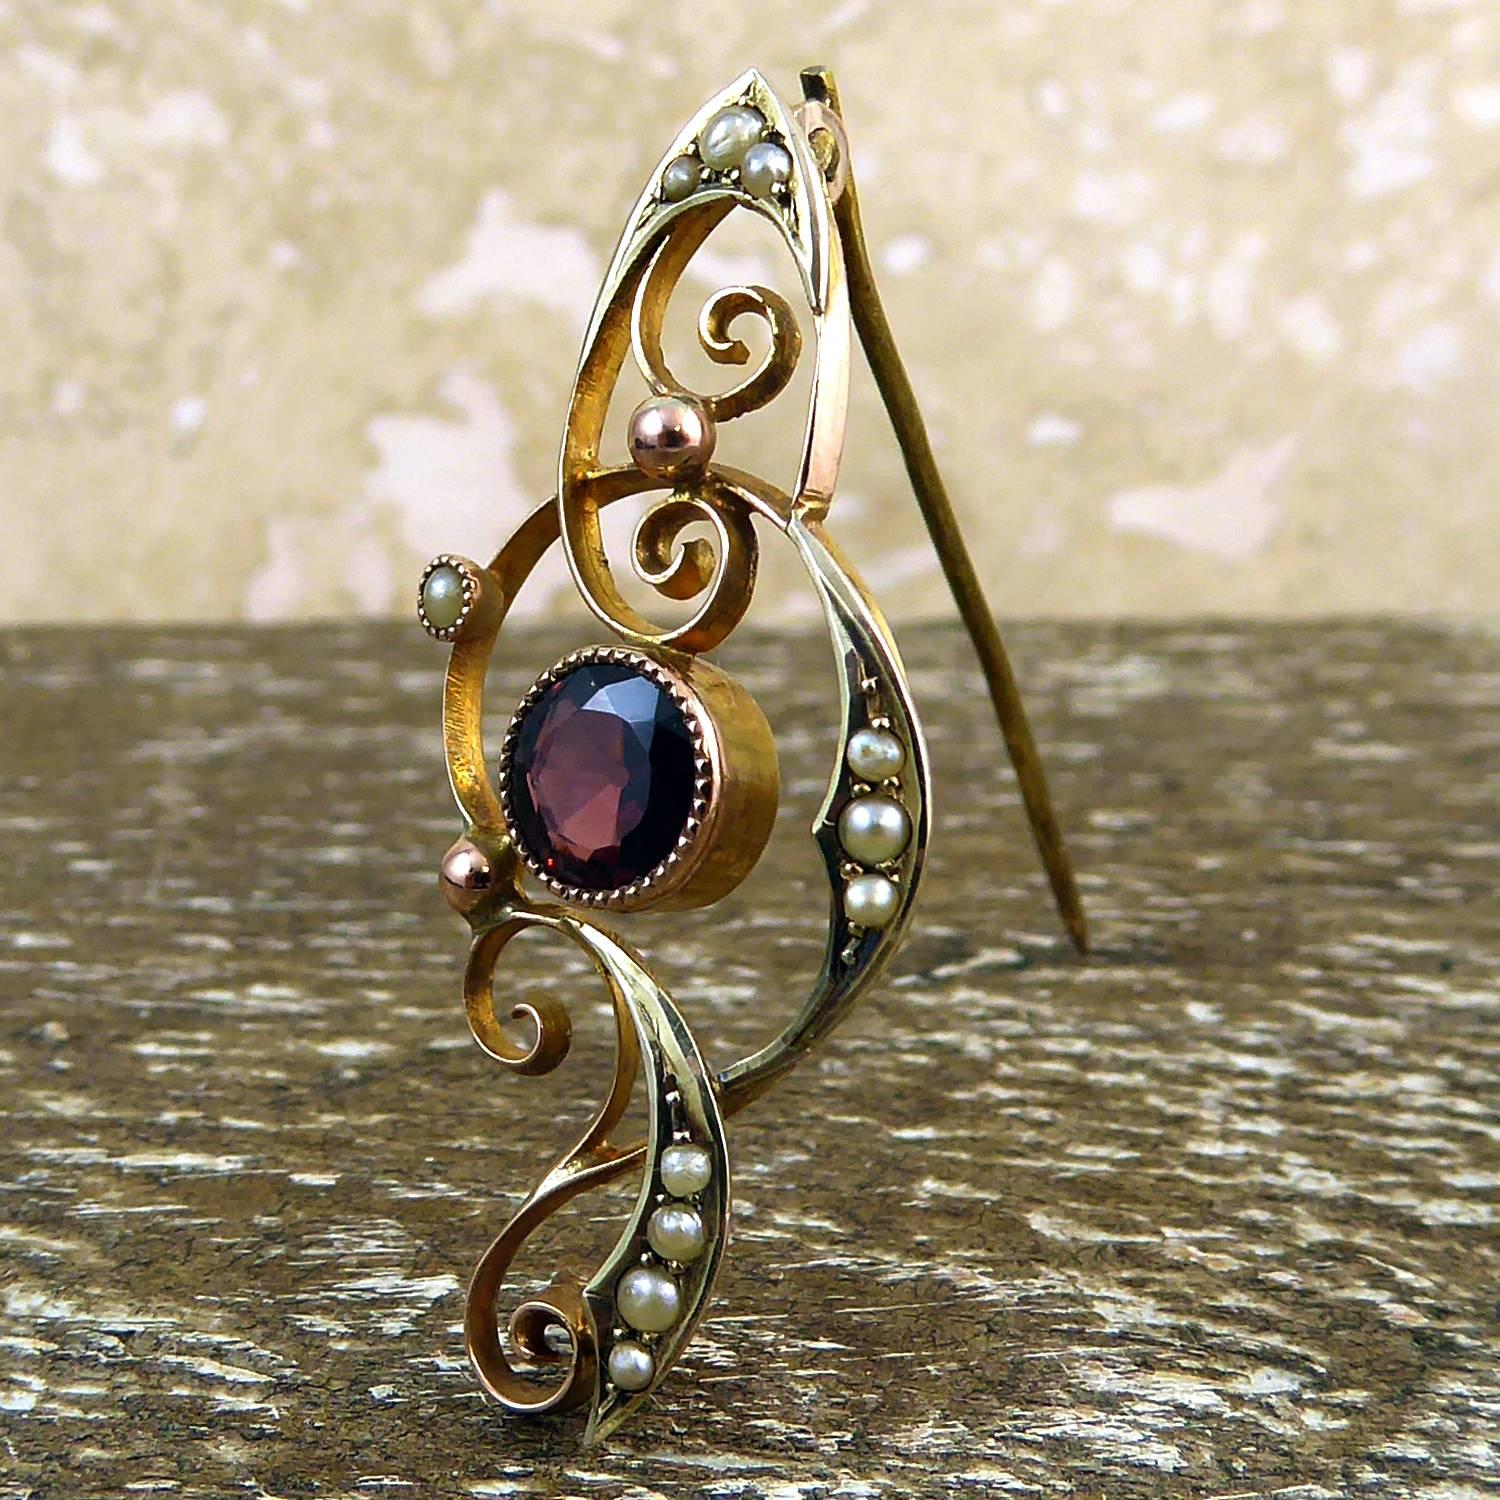 Antique Art Nouveau Gold Pin, Garnet and Seed Pearls, Rose and Yellow Gold 2